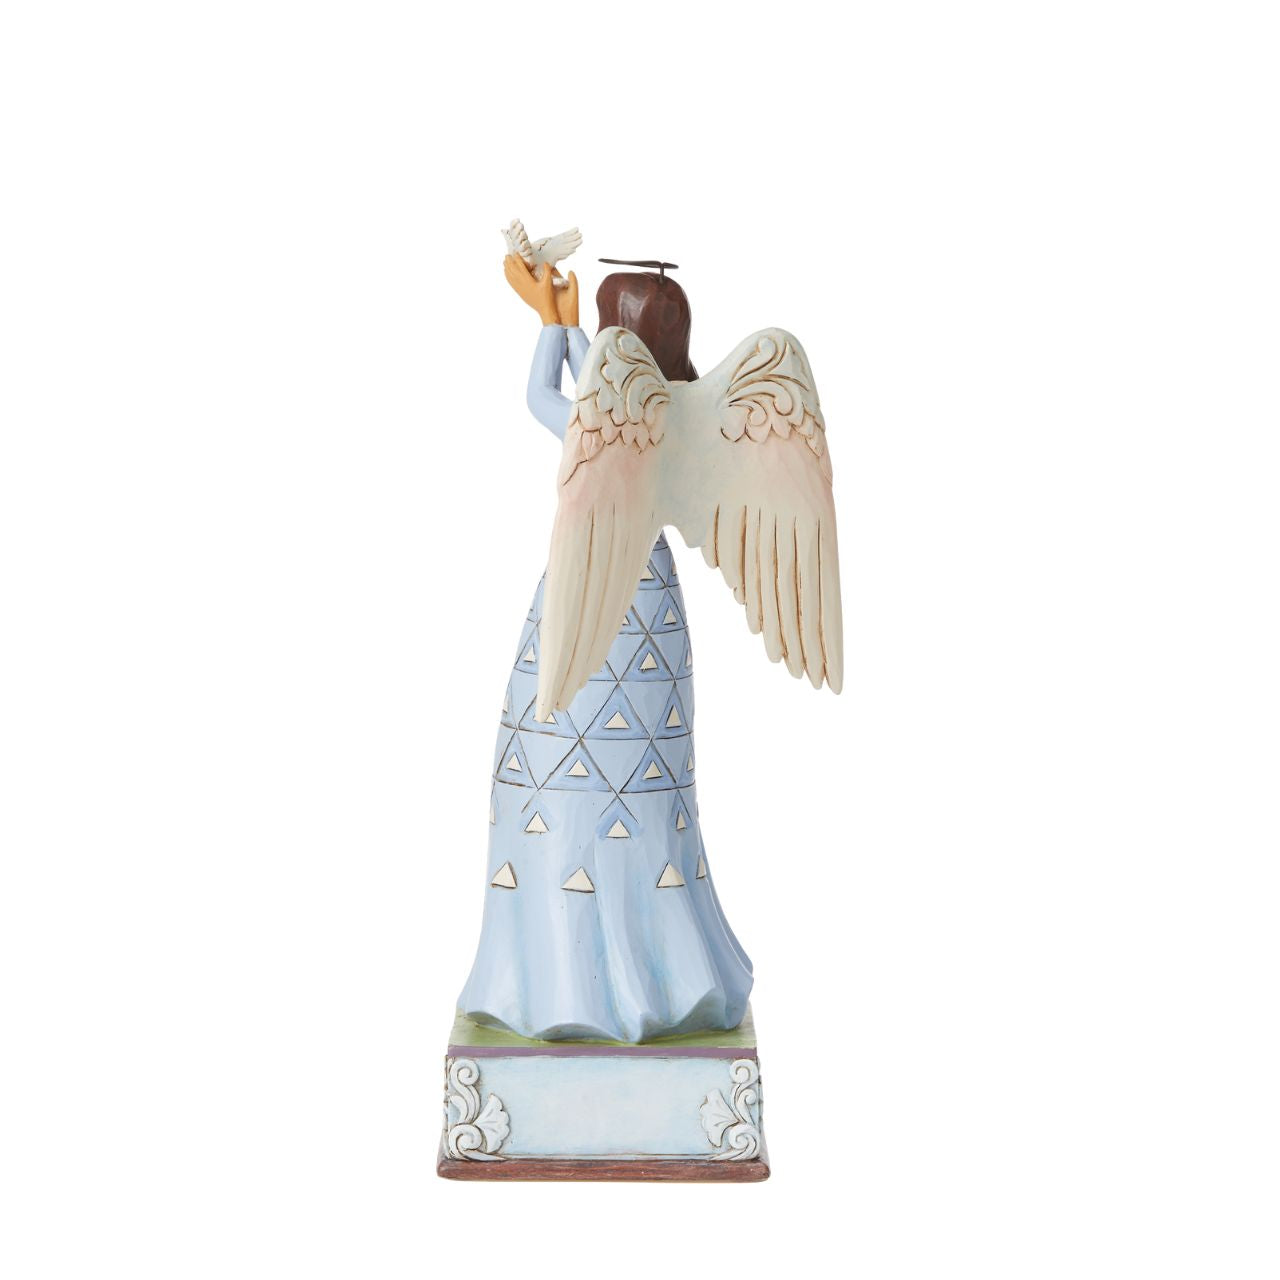 Heartwood Creek Always Remembered by Jim Shore  Designed in the iconic style of Jim Shore, this Heartwood Creek Bereavement Angel is to remember to those that have passed. Hand painted in high quality cast stone, it is a respectful way to think of loved ones no longer with us.